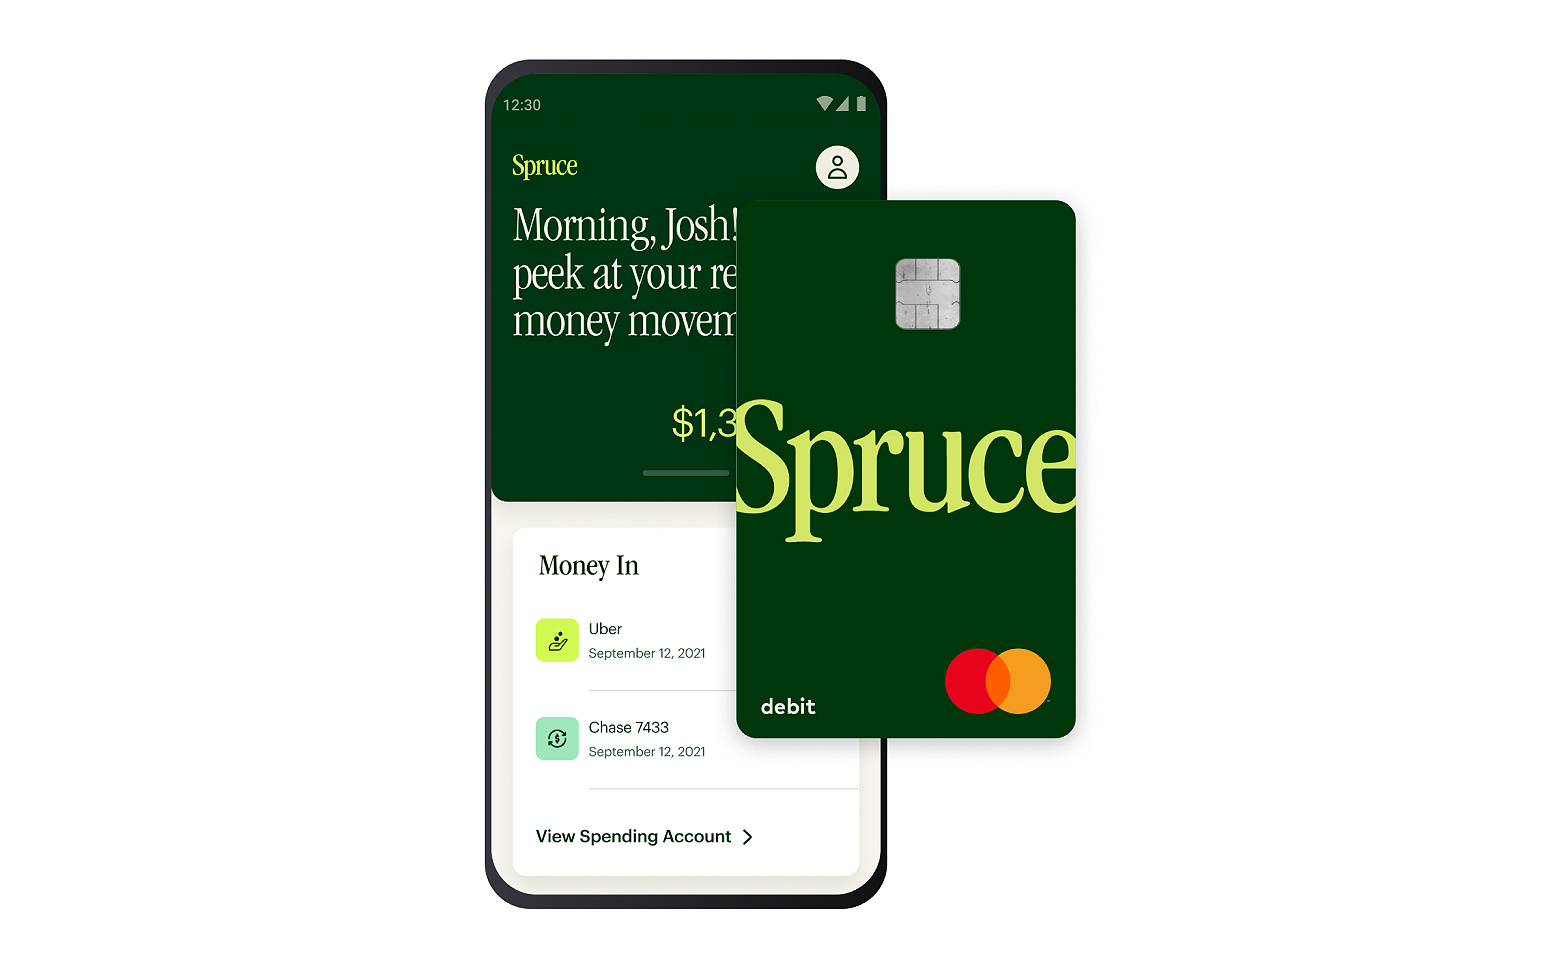 spruce mobile banking app and debit card